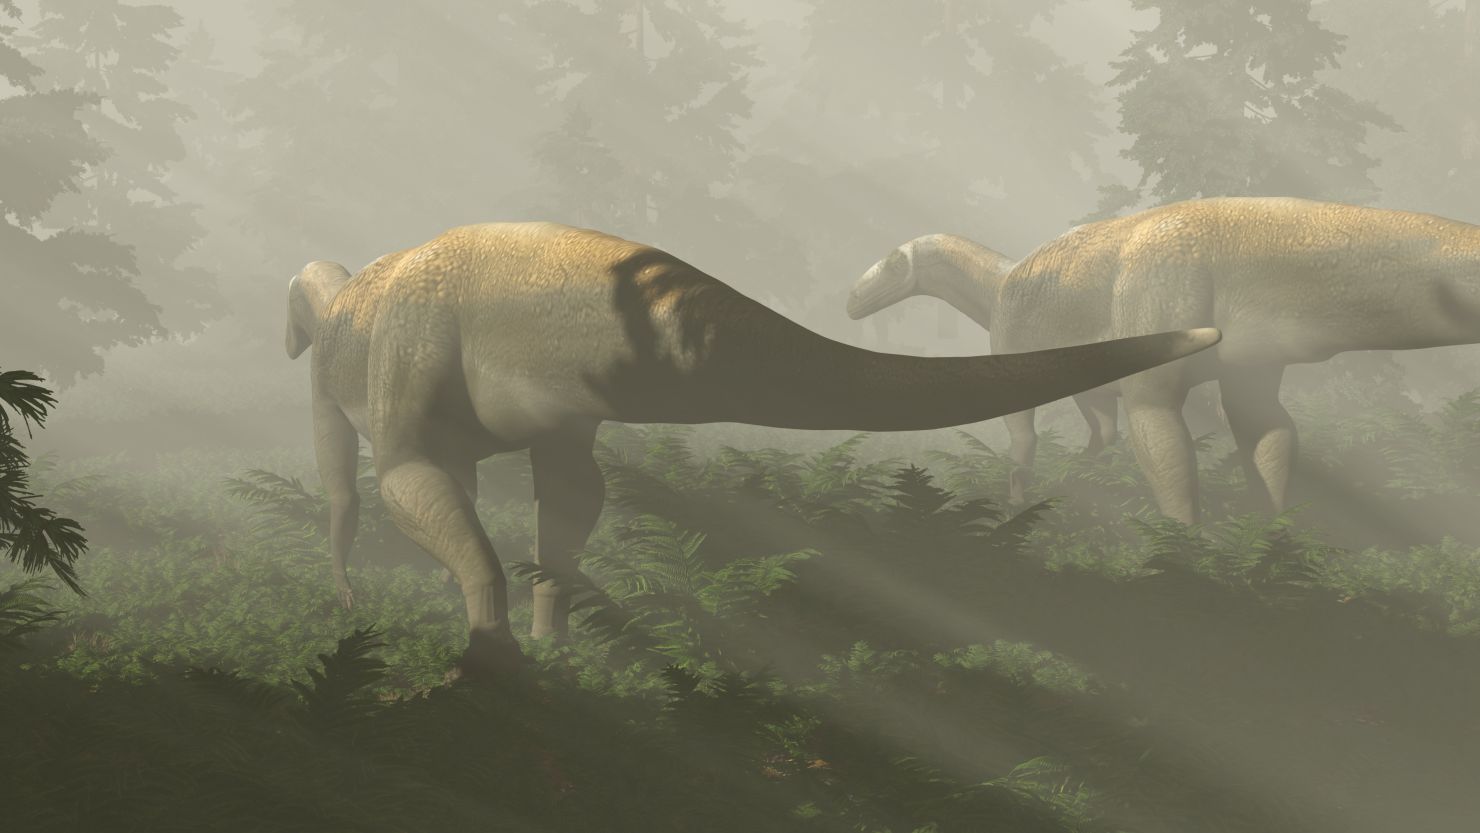 The Prosauropod is an herbivorous dinosaur who lived during the Triassic age.